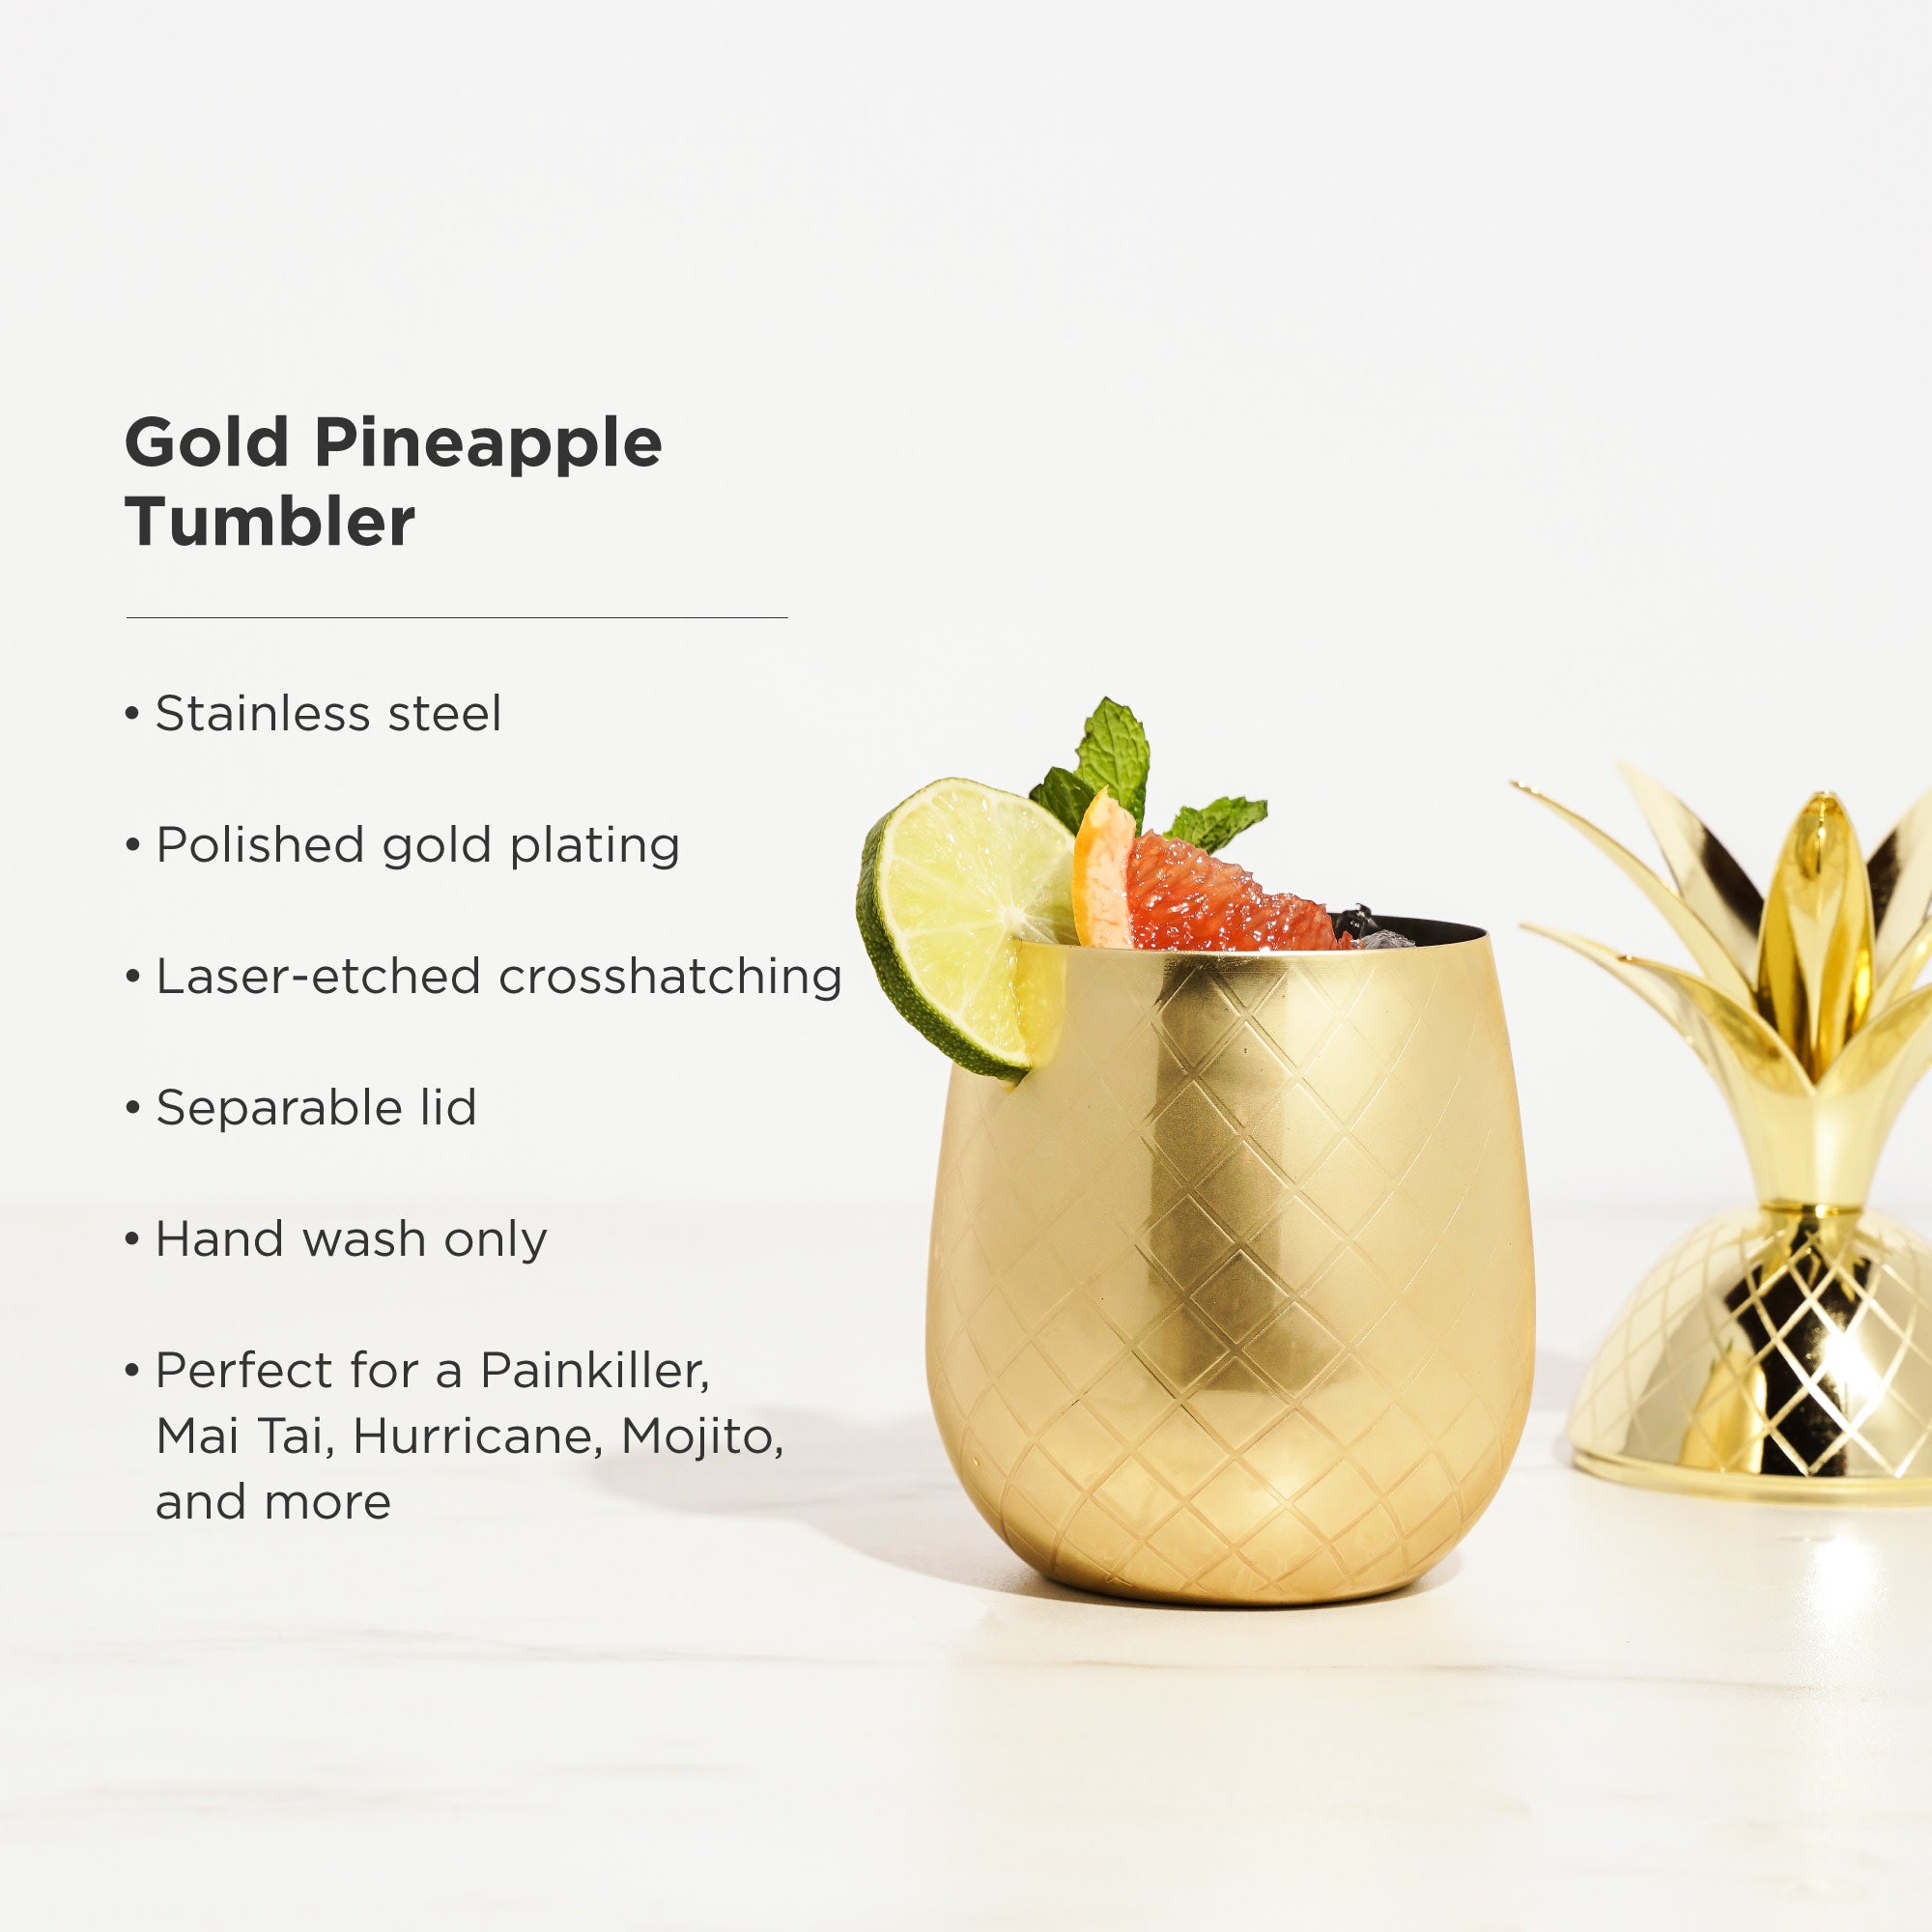 Viski Gold Pineapple Tumbler with Lid for Mai Tais, Tiki Drinks, and Craft  Cocktails, Tumbler Cup, Stainless Steel with Gold Plating, 16 Oz Set of 1